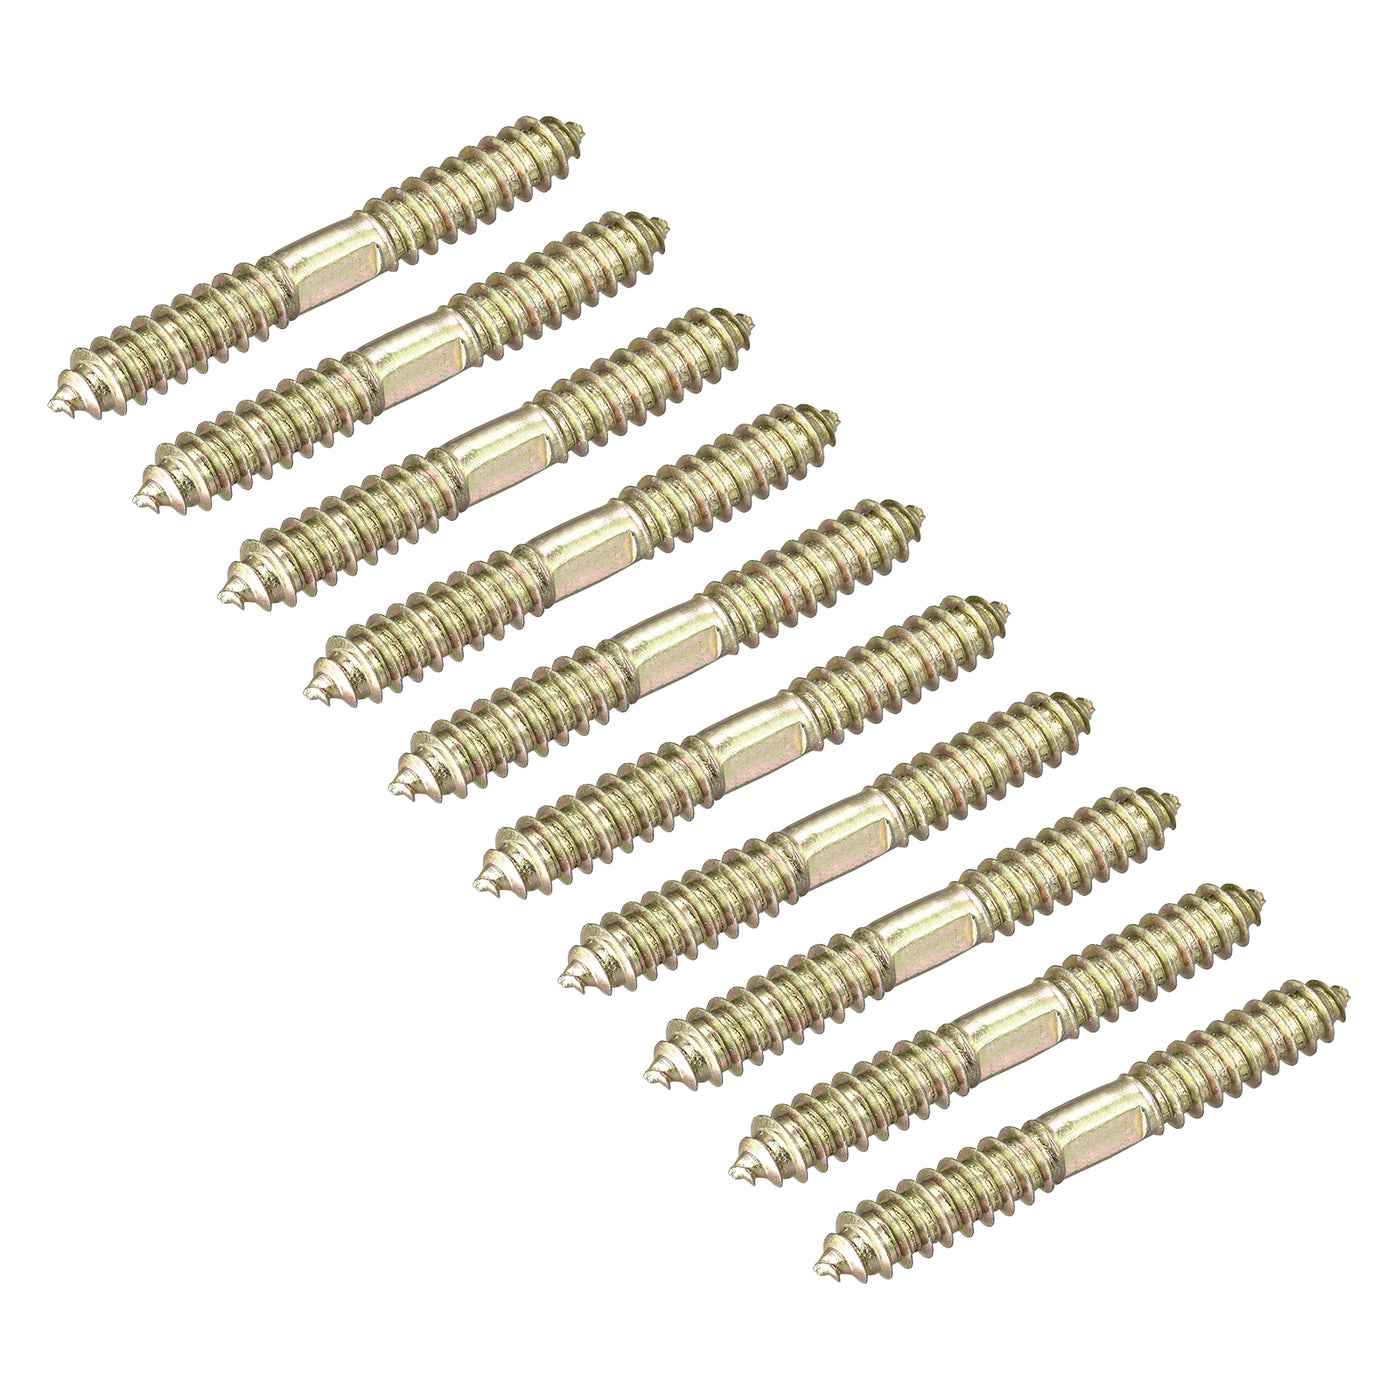 Uxcell Uxcell 5x16mm Hanger Bolts, 24pcs Double Ended Self-Tapping Thread Dowel Screws